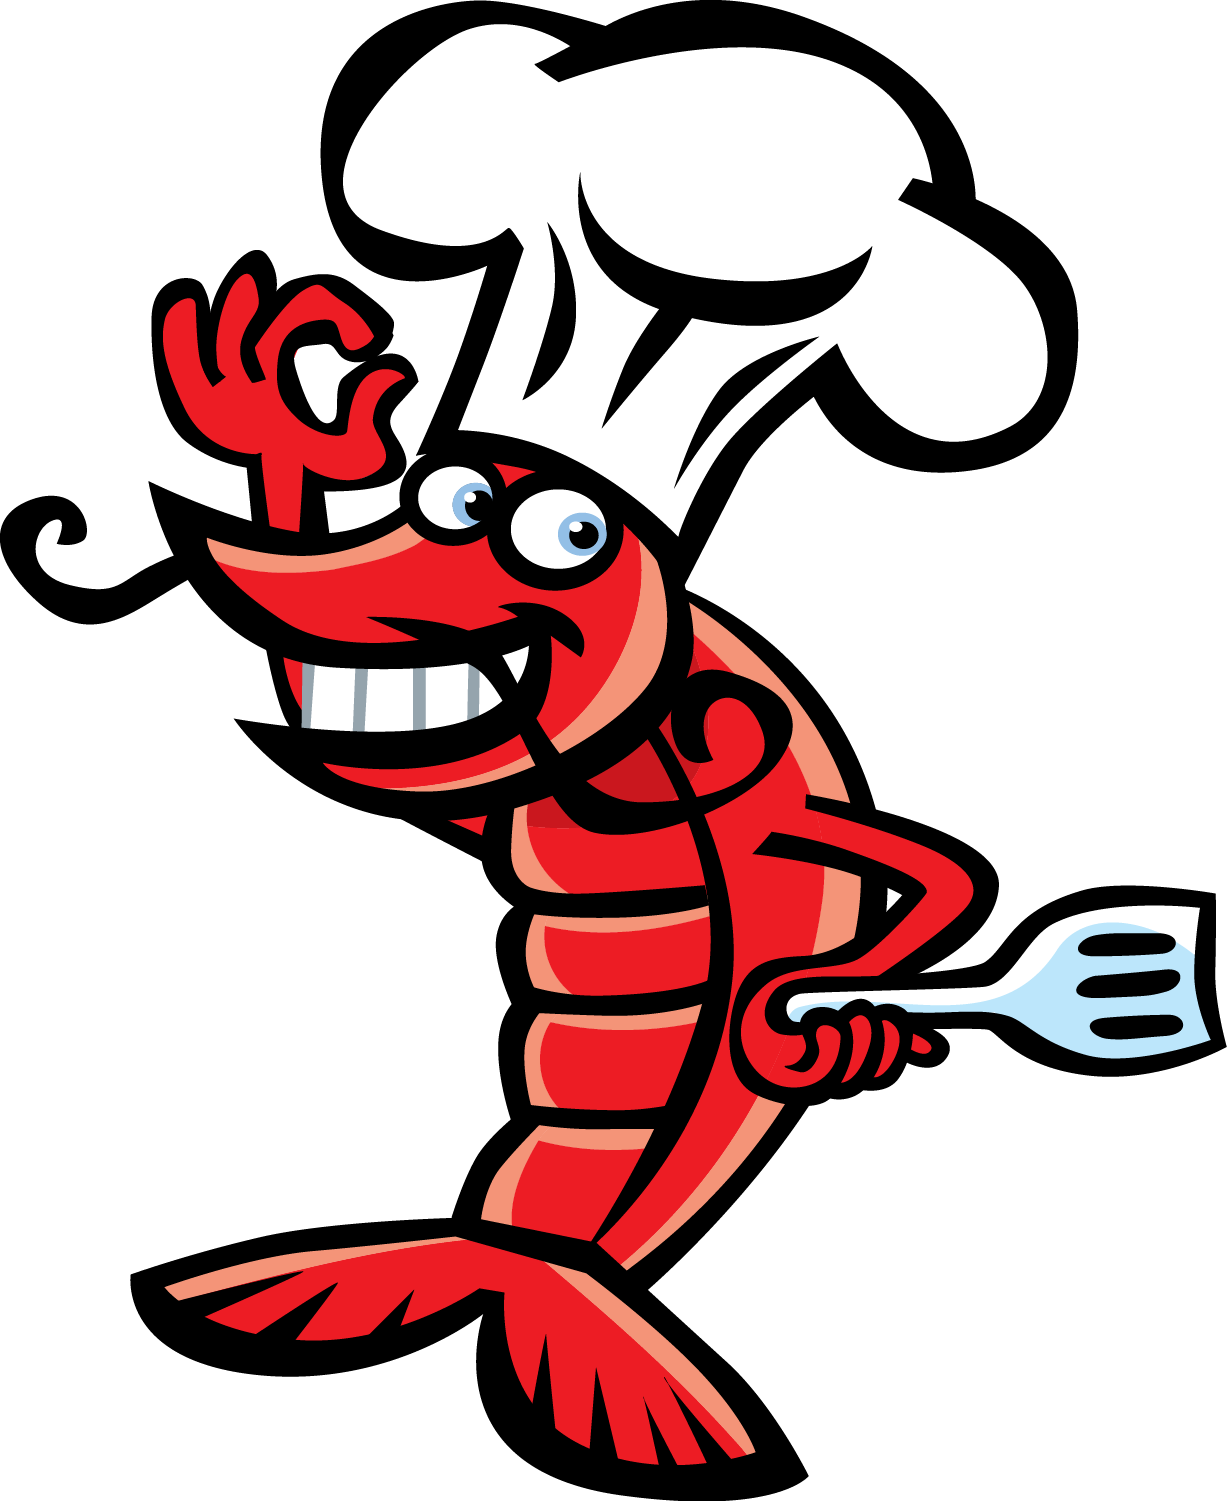 Shrimp new year a tzimmes revived clipart image #34206.